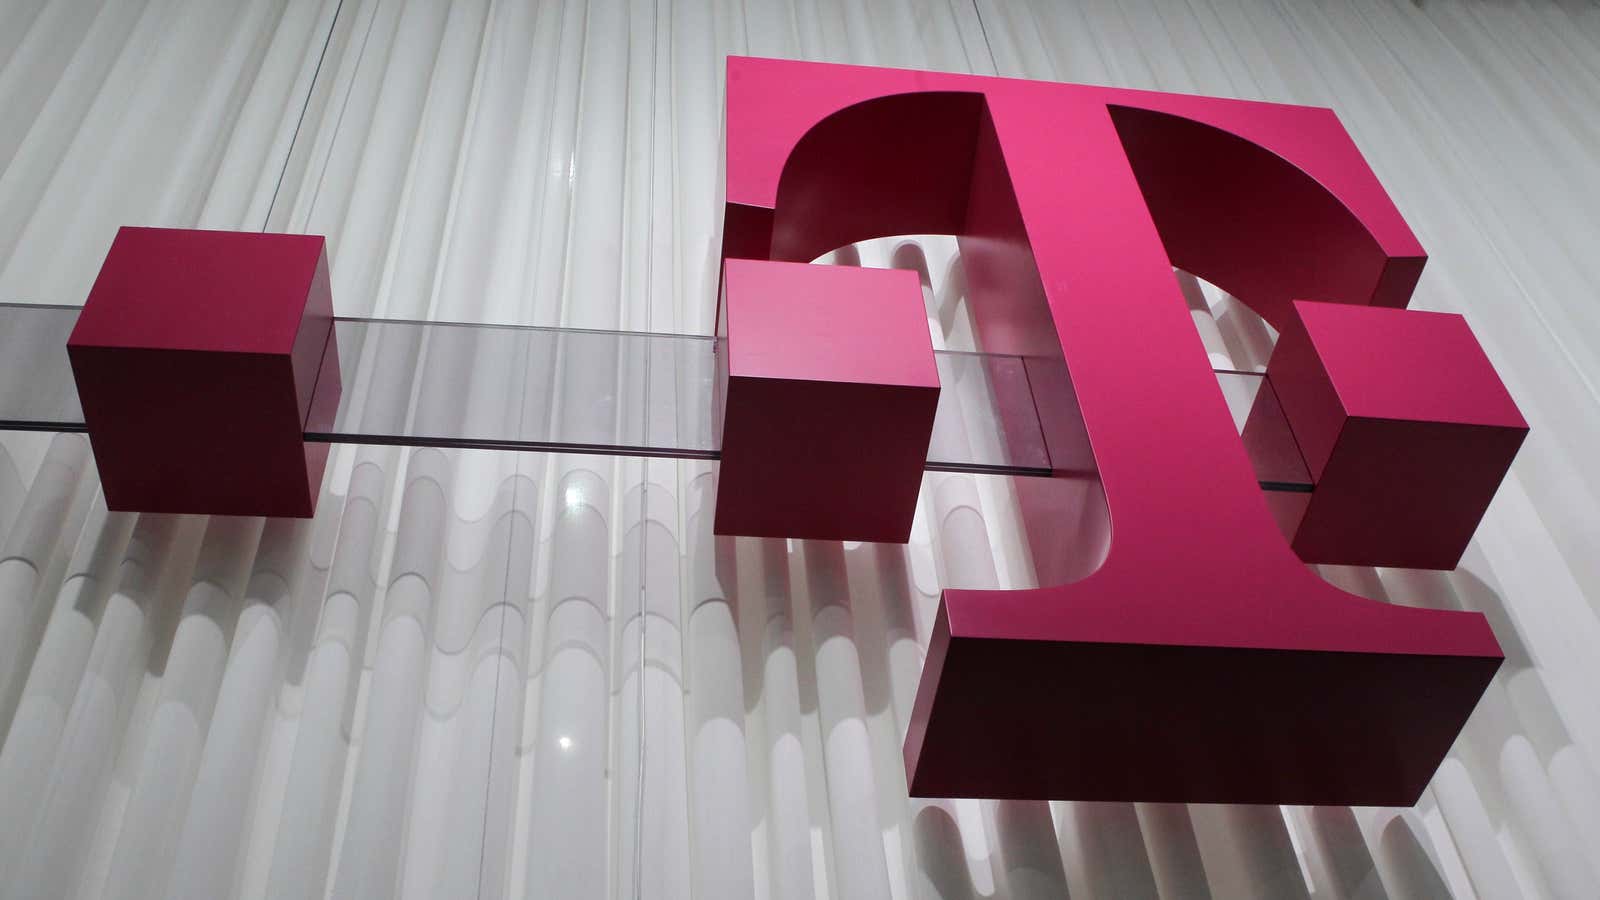 T-Mobile wants you to know exactly how much that phone cost.